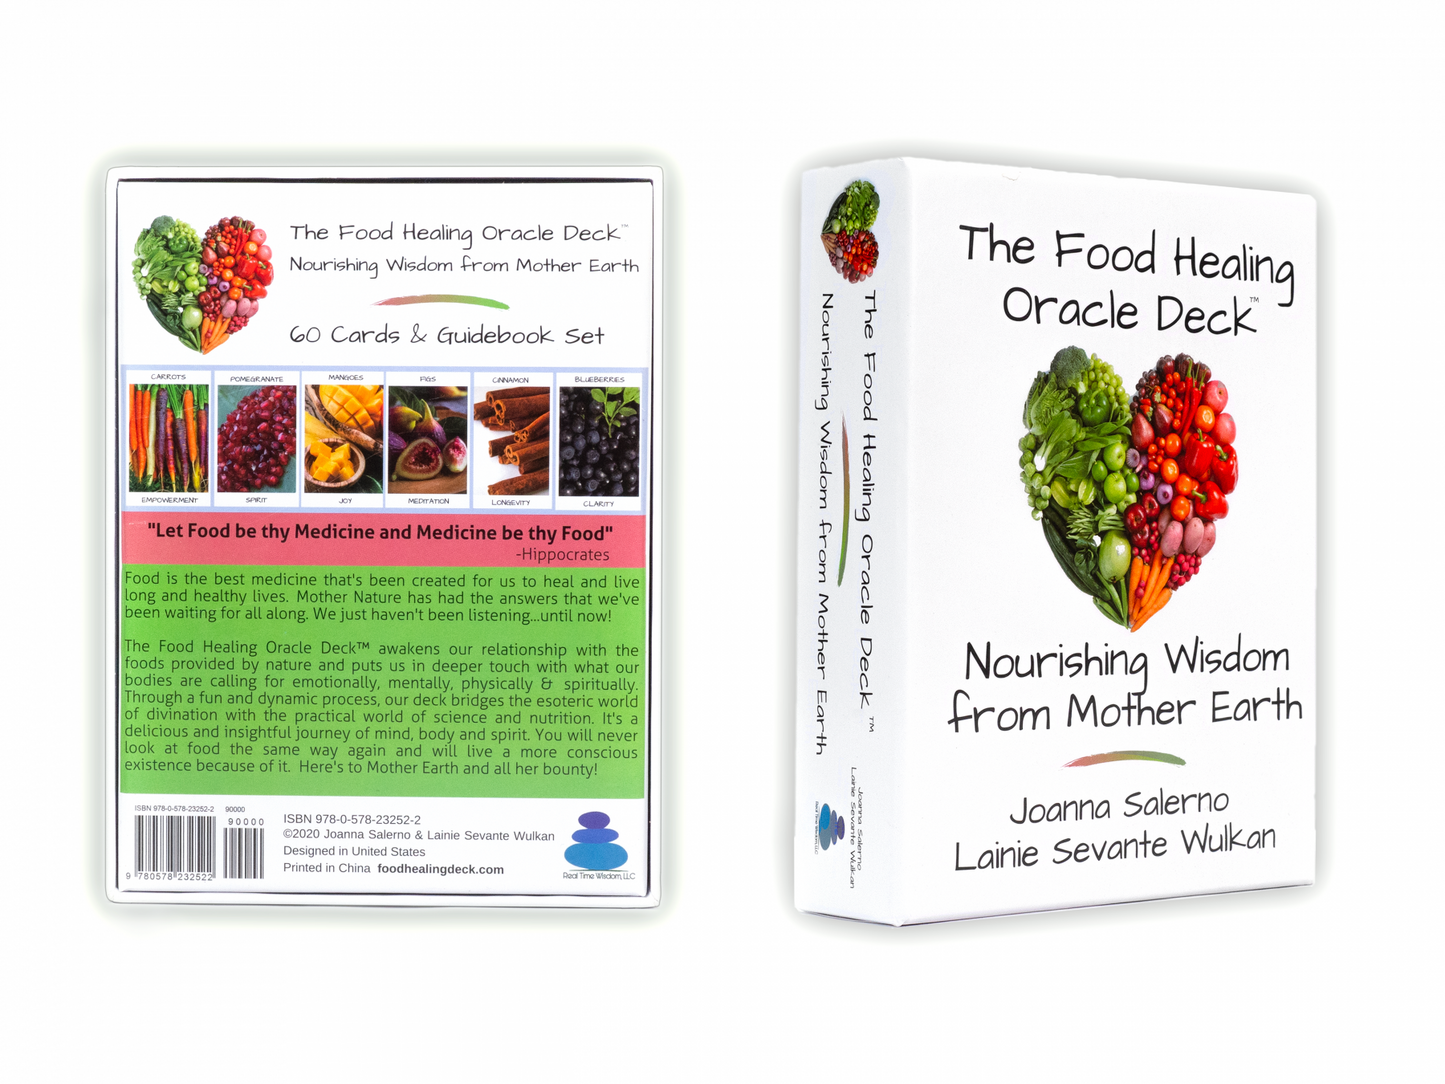 The Food Healing Oracle Deck ™ with Book by Lainie Sevante Wulkan and Joanna Salerno